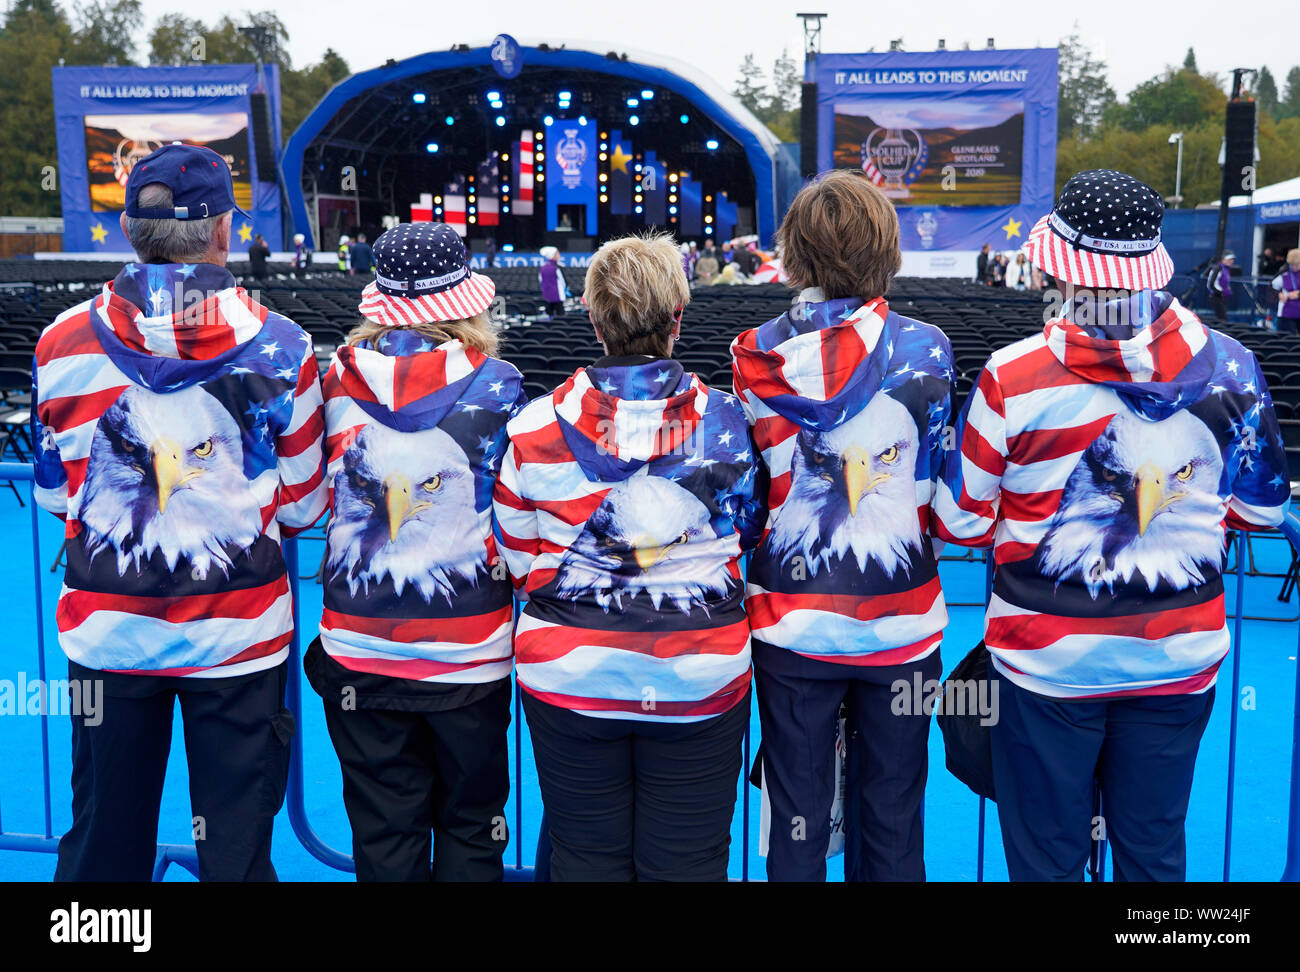 Auchterarder, Scotland, UK. 12 September 2019. Final practice day for the 2019 Solheim Cup before the official opening saw many patriotic fans arrive on the course at Gleneagles. Pictured; Team USA fans from Delaware in the USA wearing patriotic American Eagle shirts. Iain Masterton/Alamy Live News Stock Photo